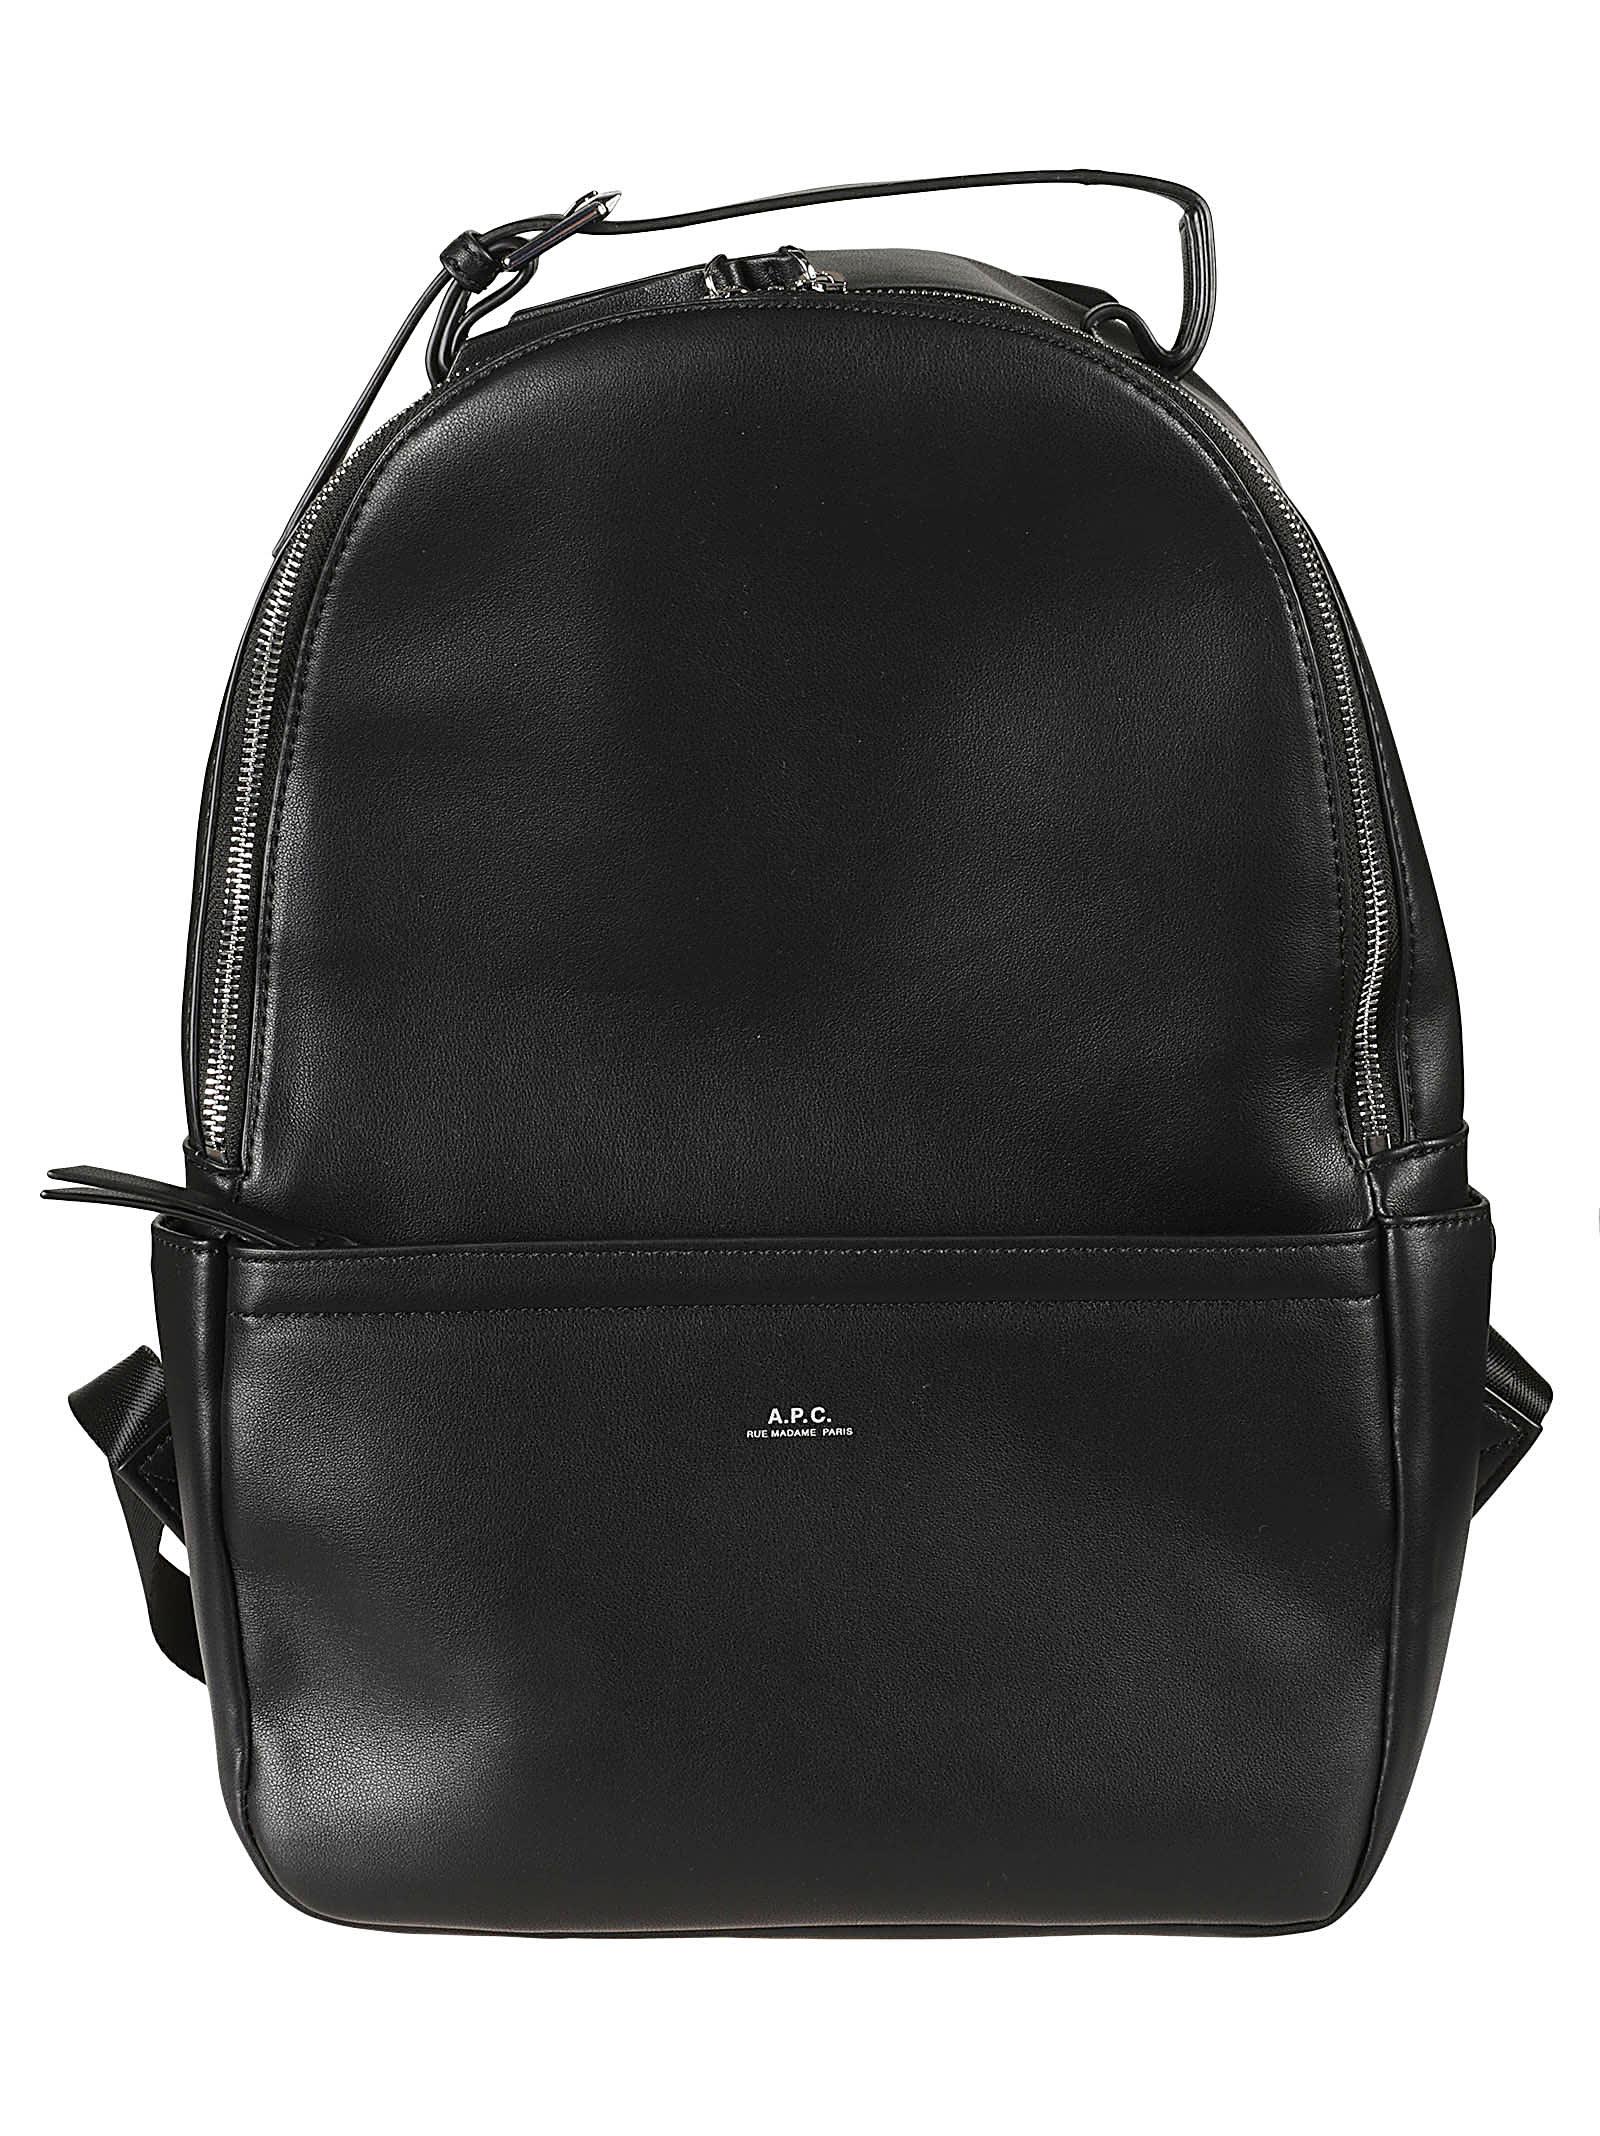 A.P.C. Logo Stamp Zipped Backpack in Black for Men | Lyst